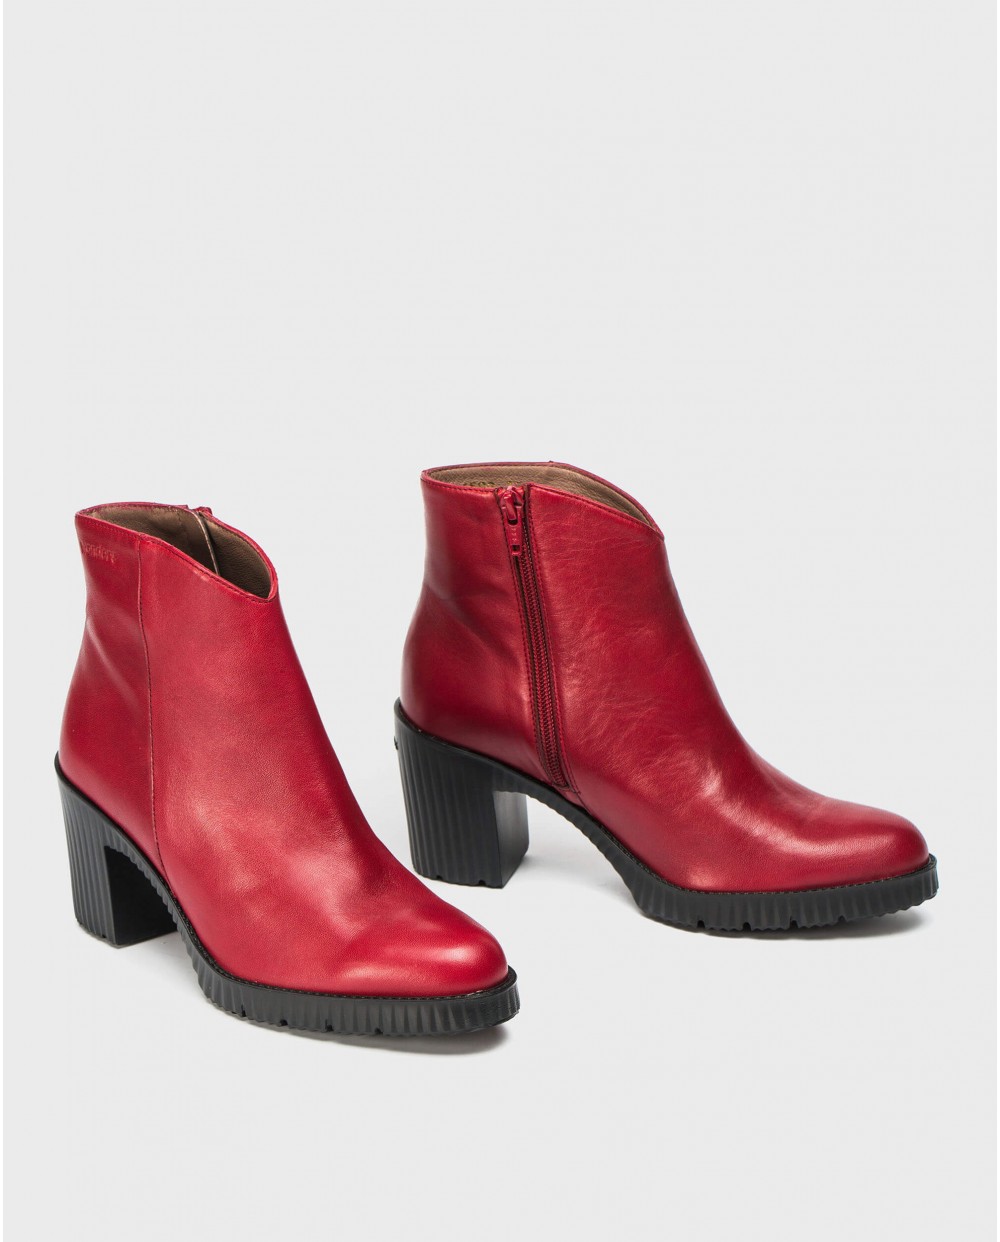 Wonders-Ankle Boots-Soft platform ankle boot